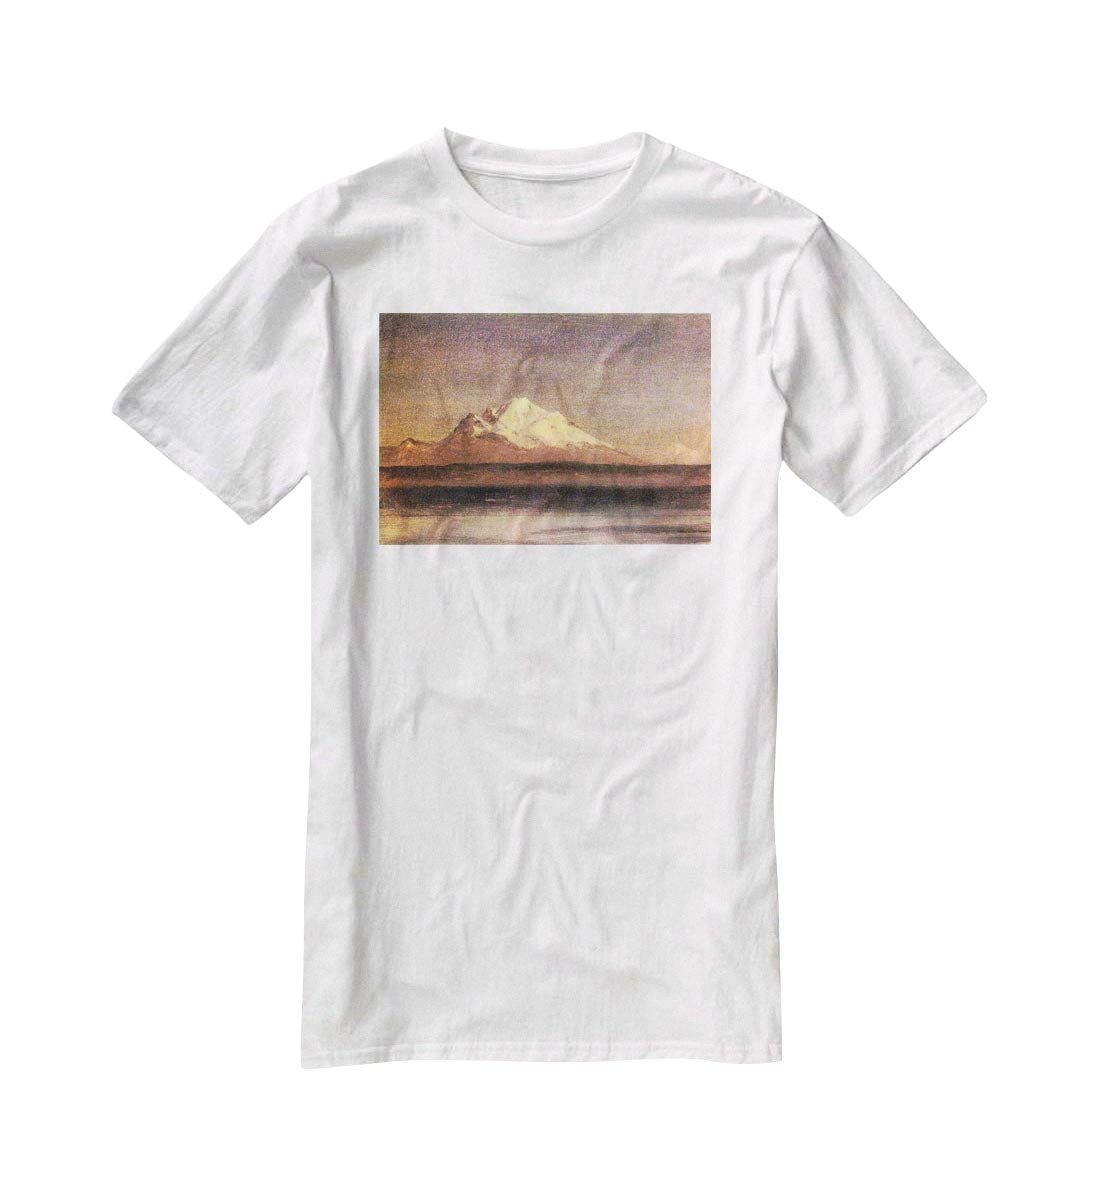 Snowy Mountains in the Pacific Northwest 2 by Bierstadt T-Shirt - Canvas Art Rocks - 5